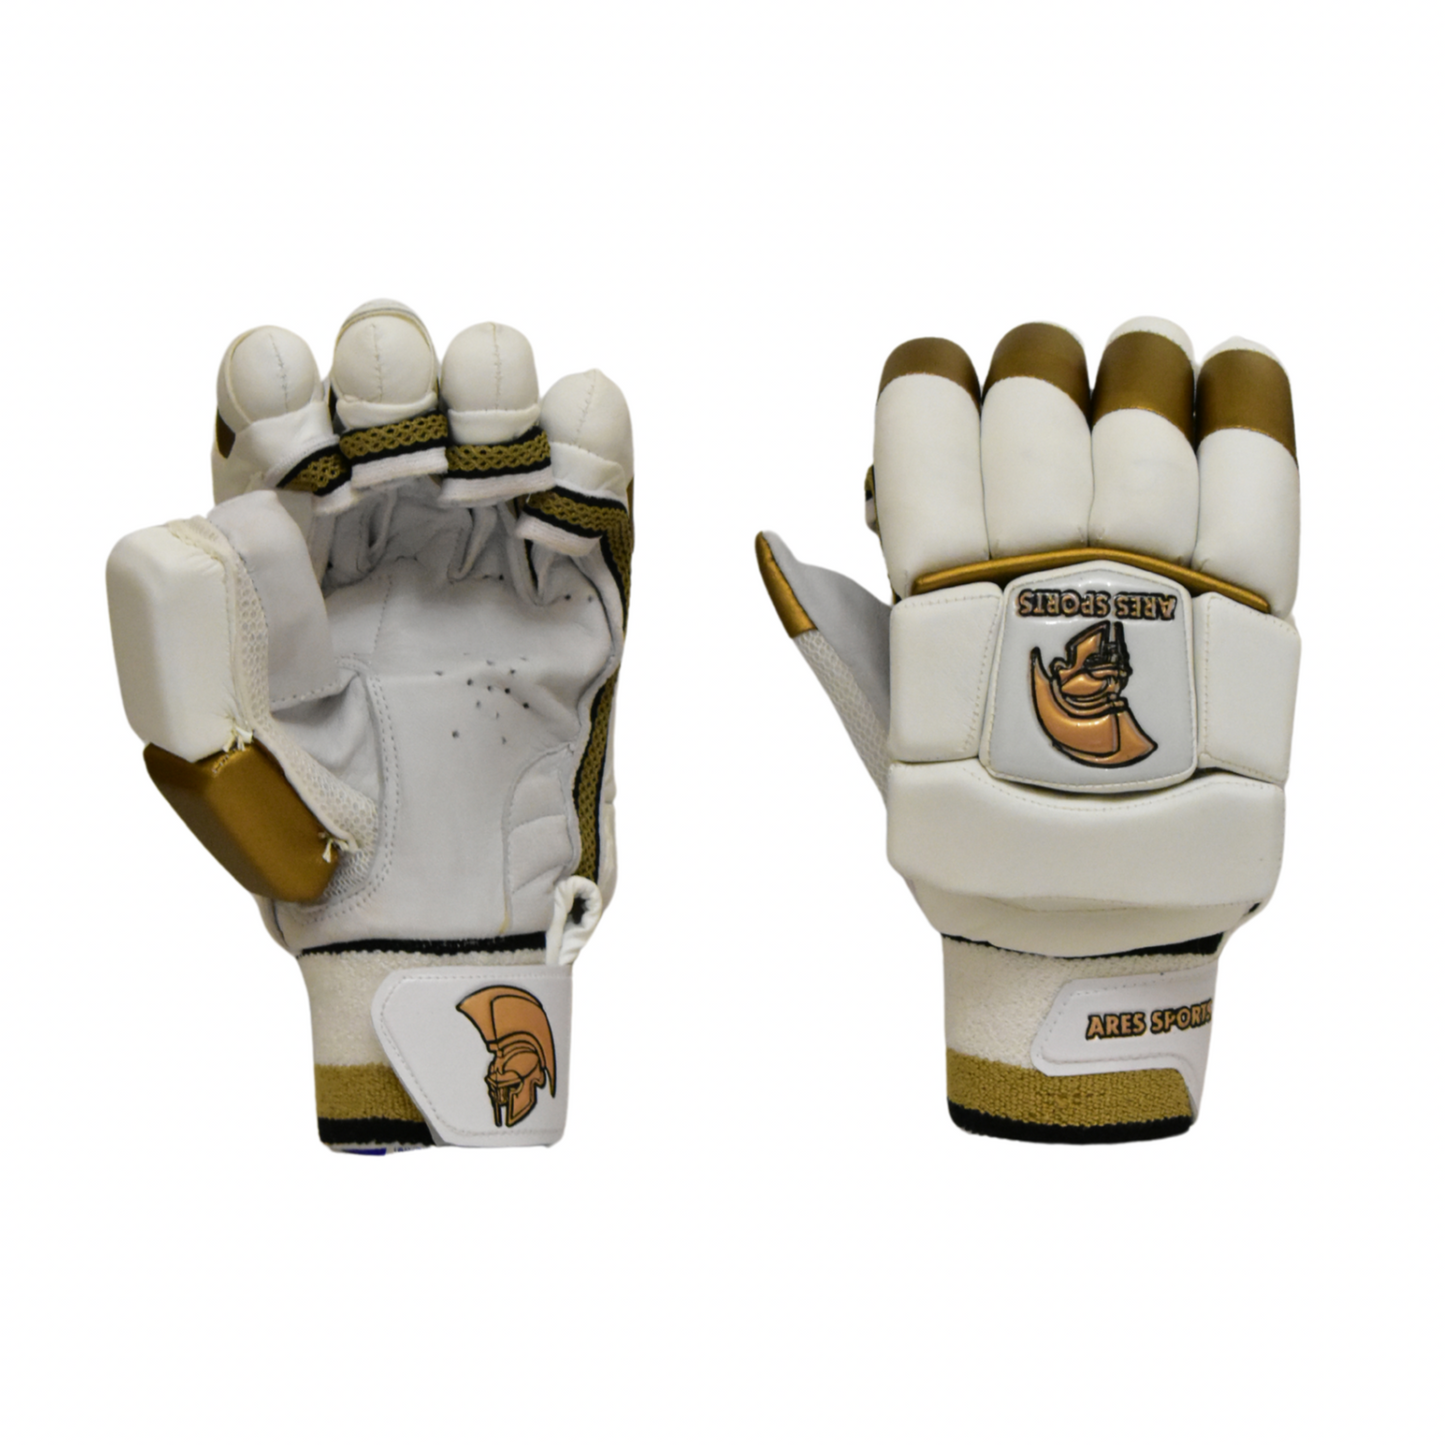 Ares Sports Cricket Batting Gloves White/Gold